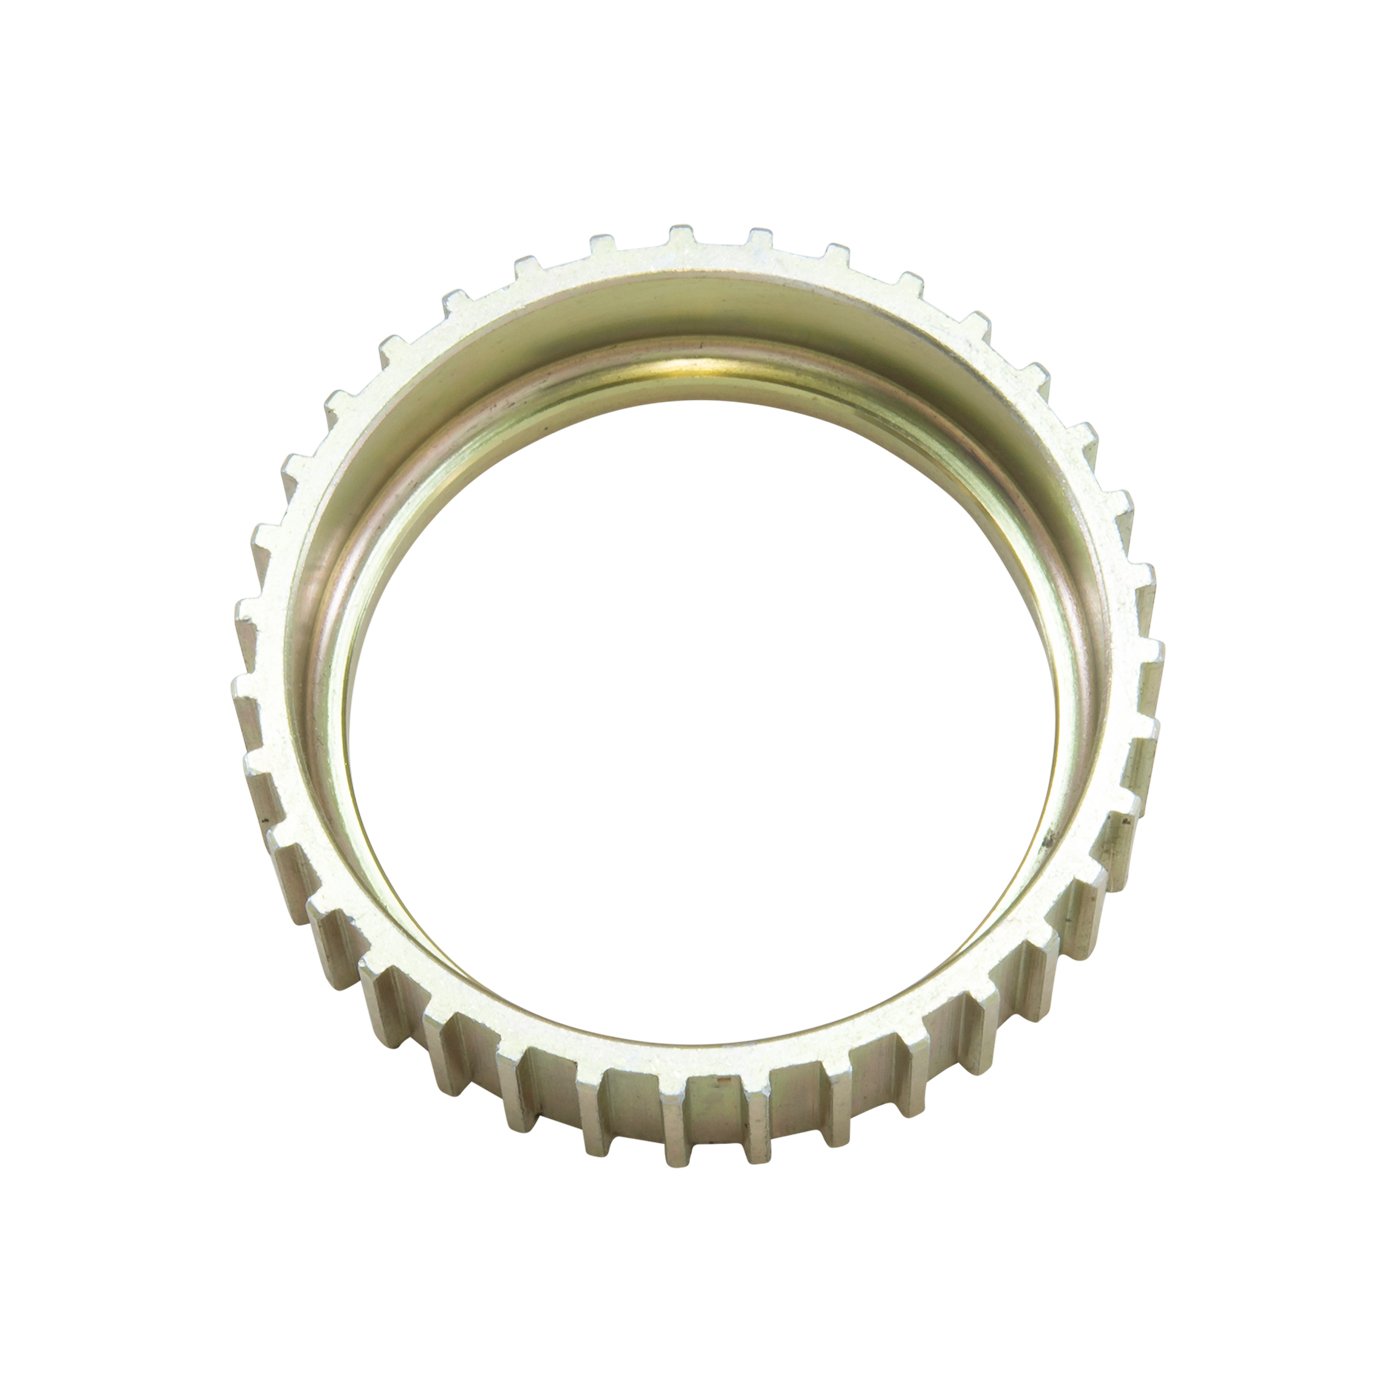 Axle Abs Tone Ring For '03 & Up Crown Victoria, 3.6 in. Diameter, 35 Teeth